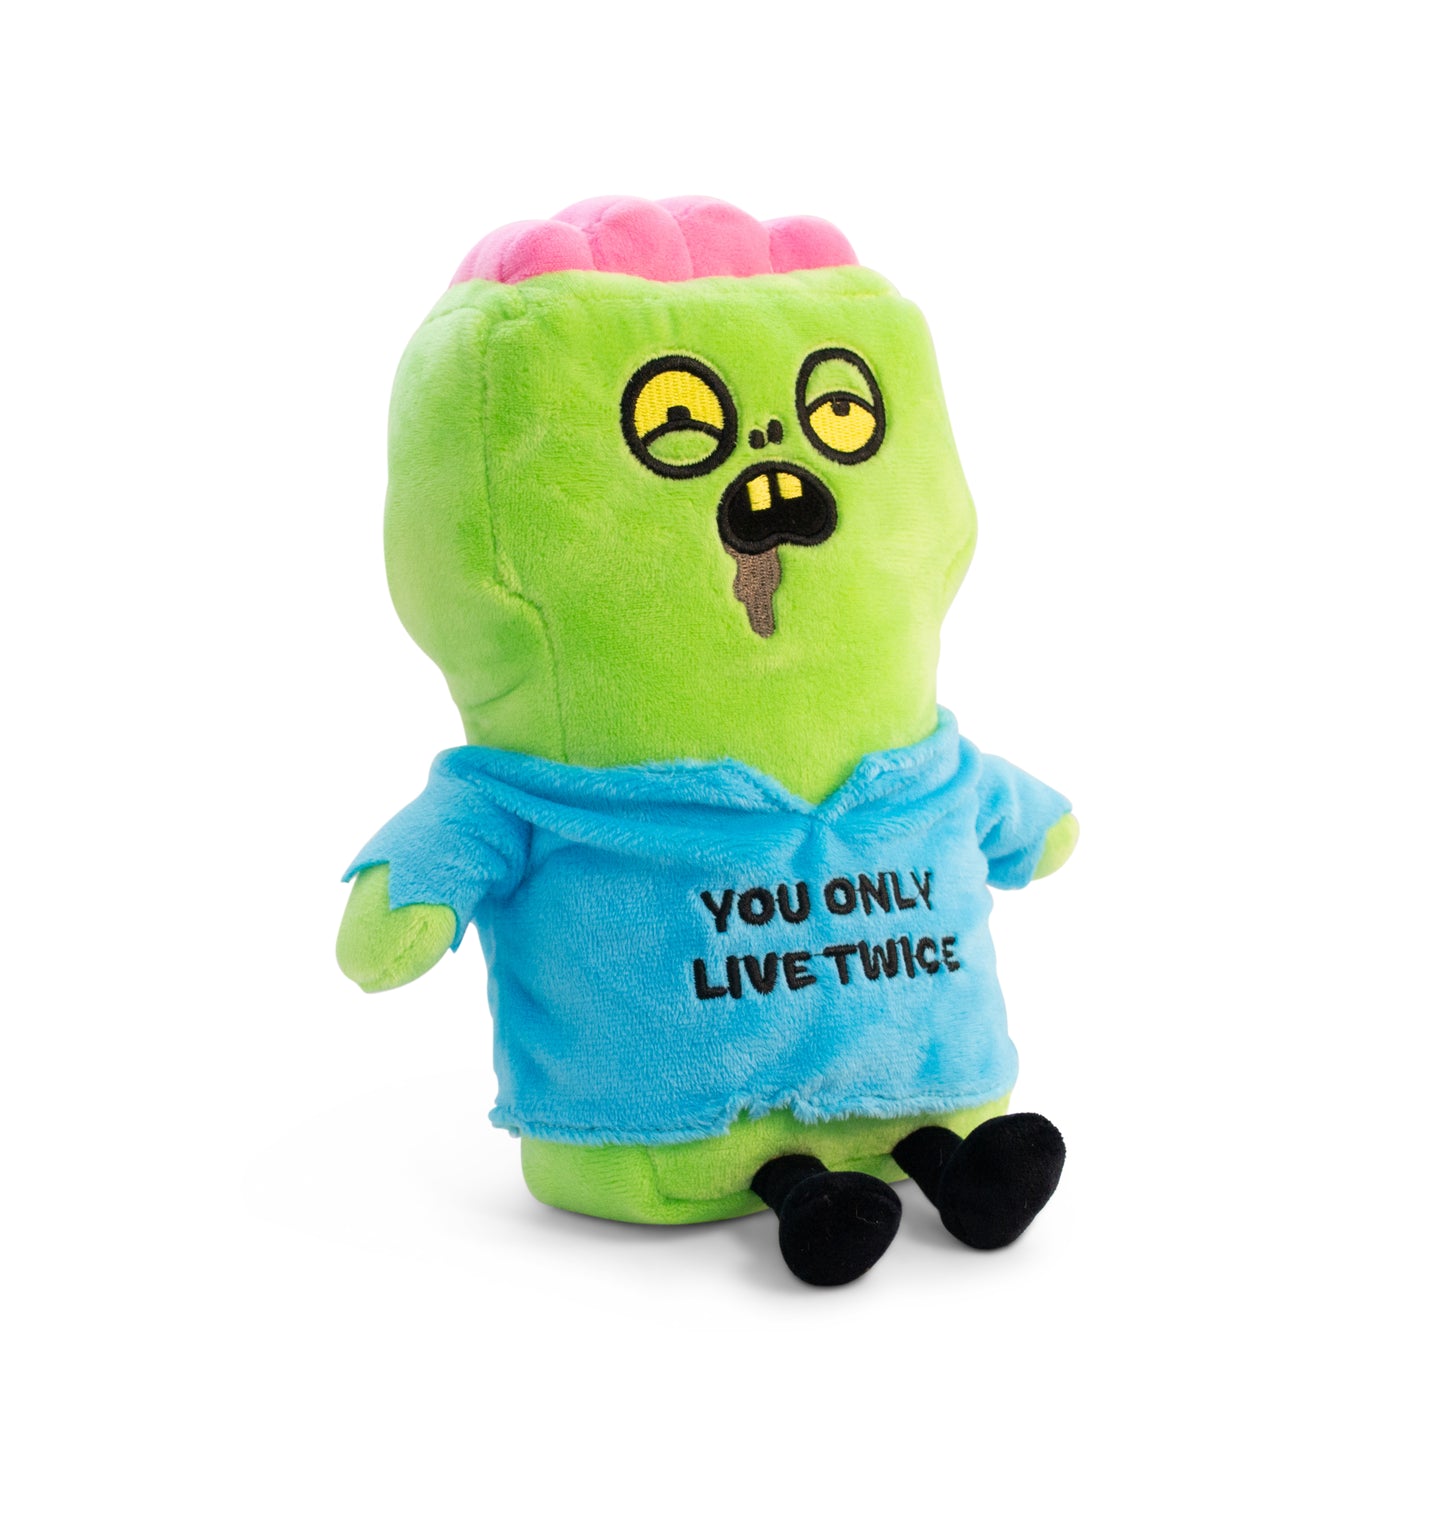 "You Only Live Twice" Zombie Plush